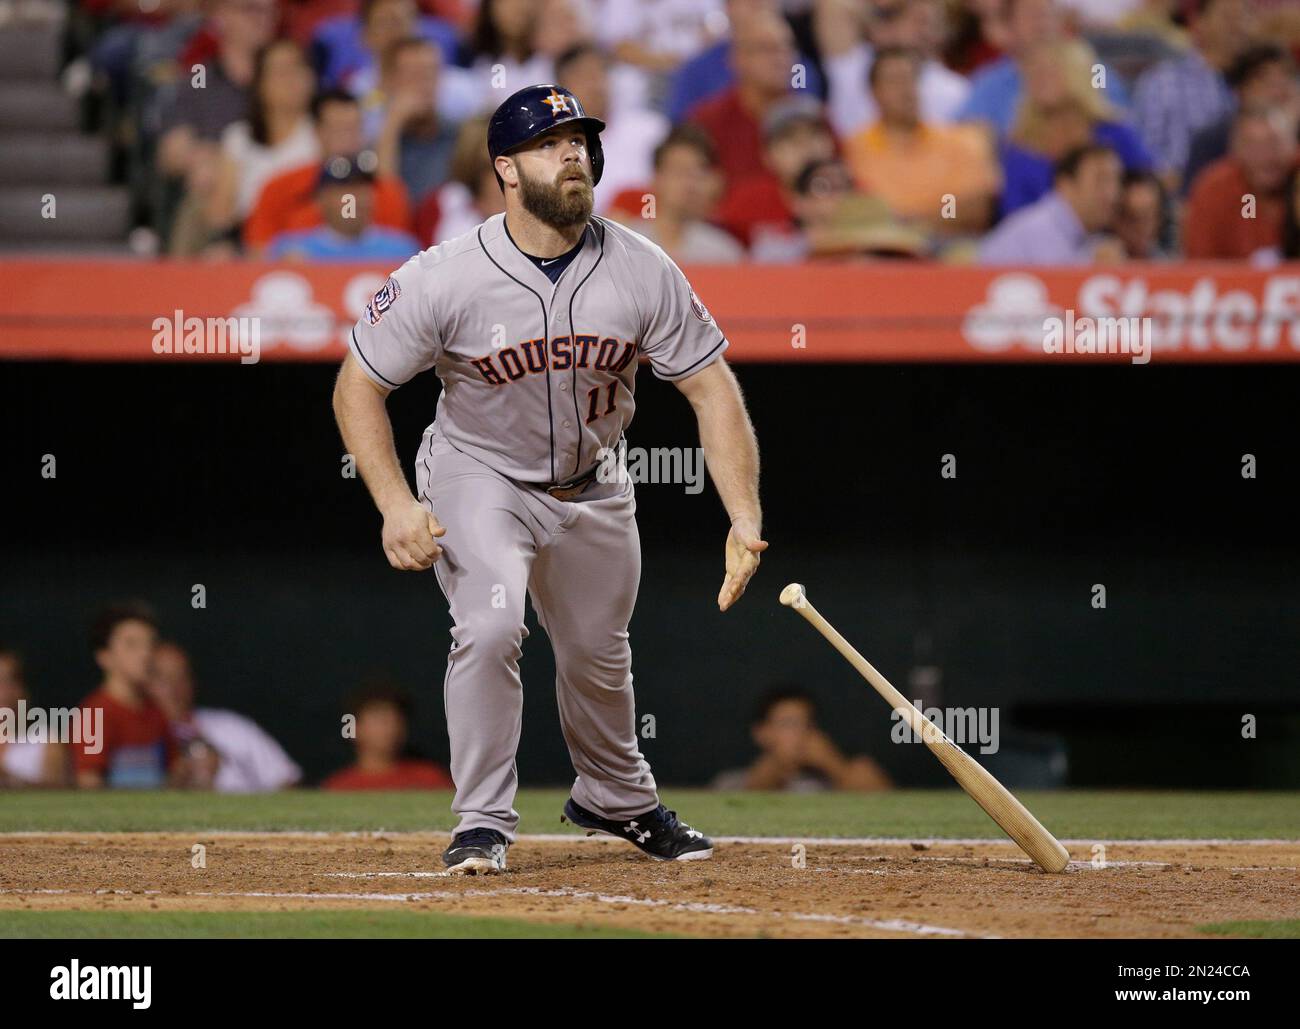 Houston Astros' Evan Gattis watches his sacrifice fly ball during the  fourth inning of a baseball game against the Los Angeles Angels, Tuesday,  June 23, 2015, in Anaheim, Calif. (AP Photo/Jae C.